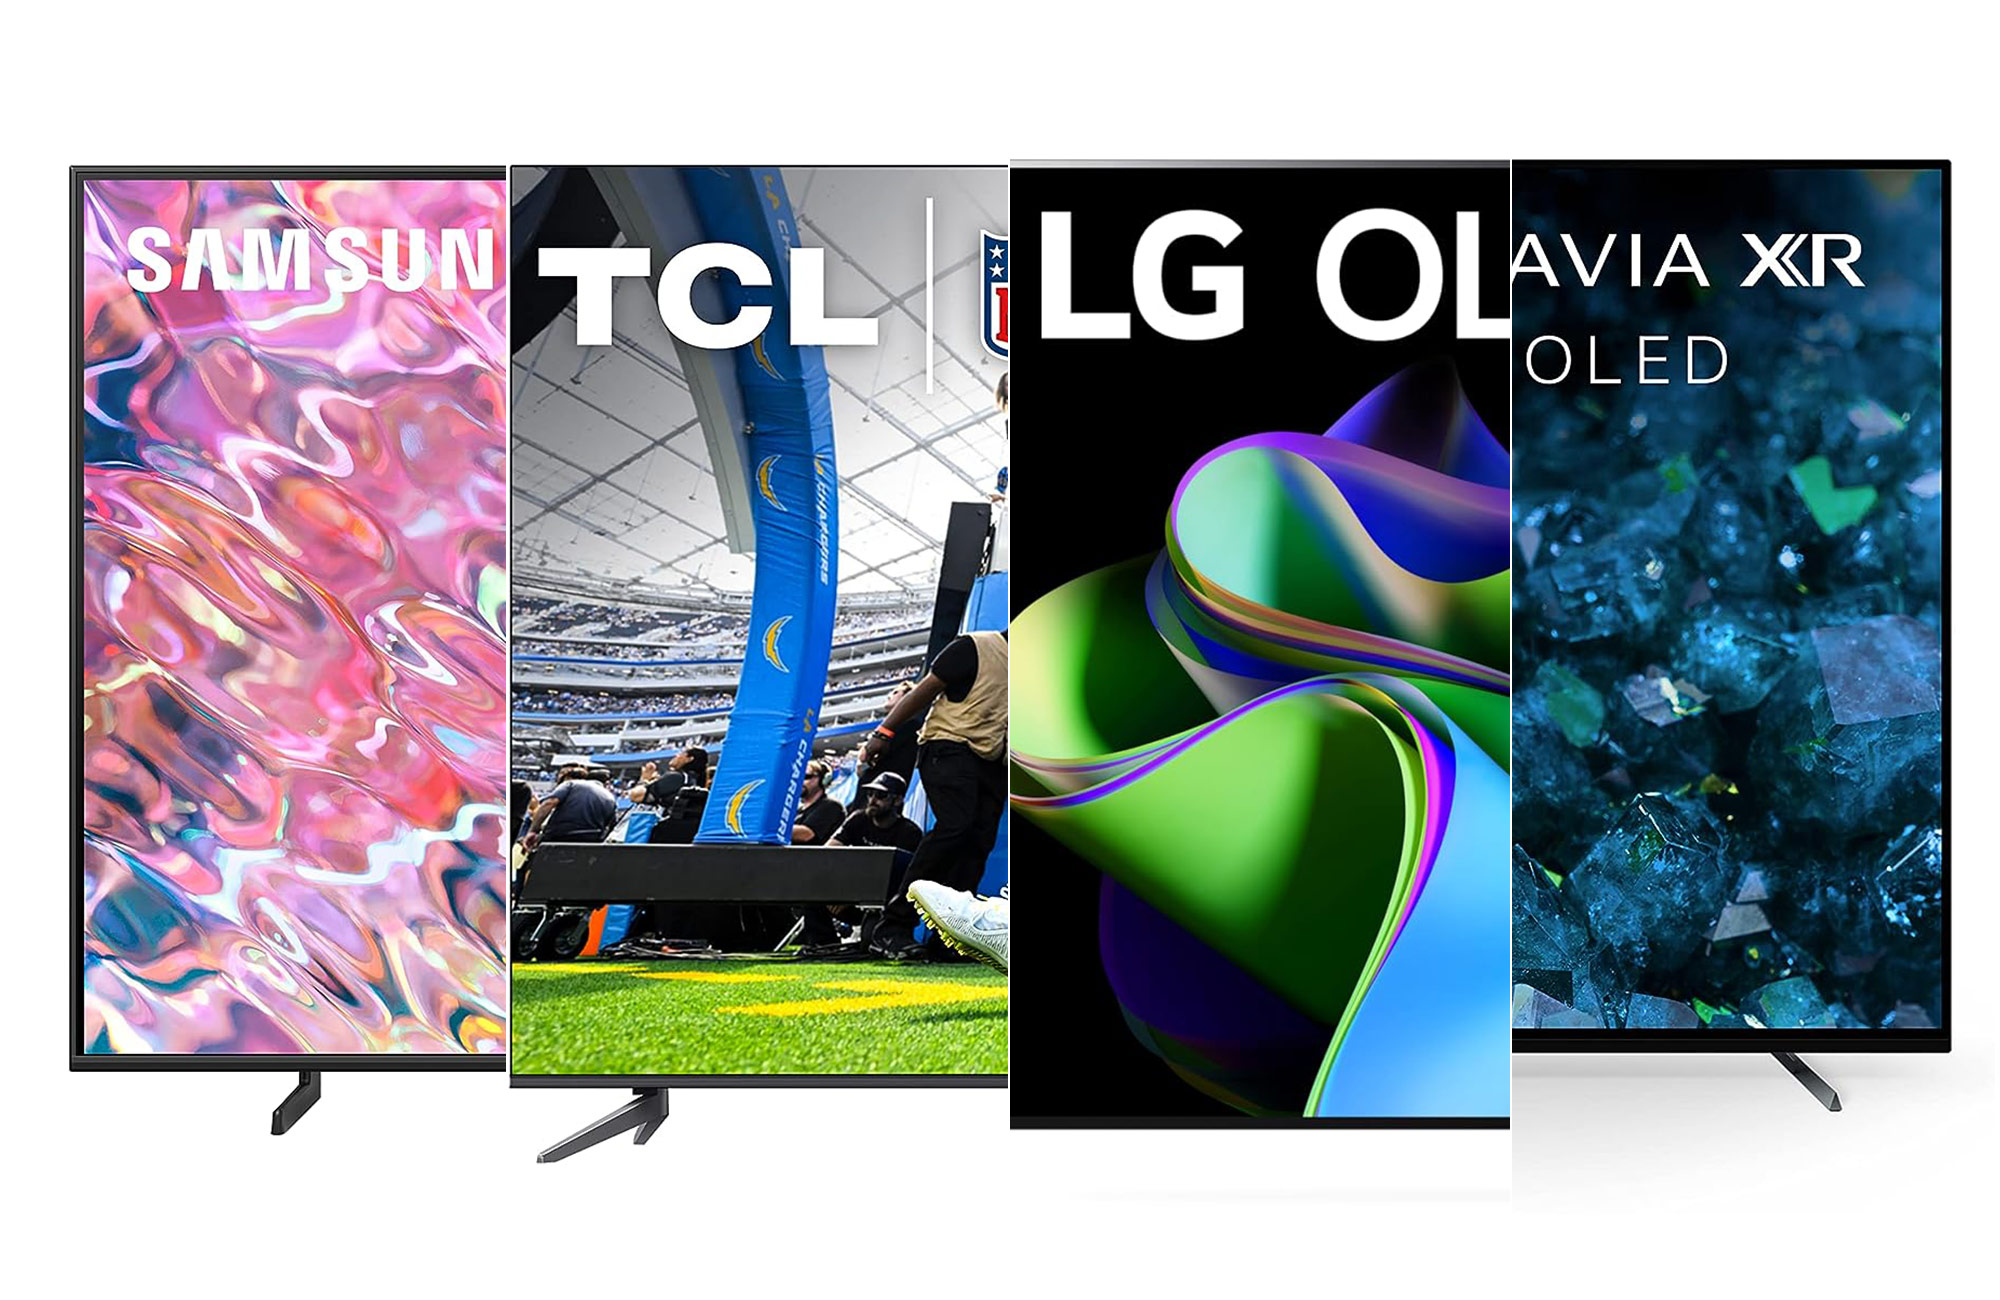 Take your pick between these two fantastic LG OLED TV deals